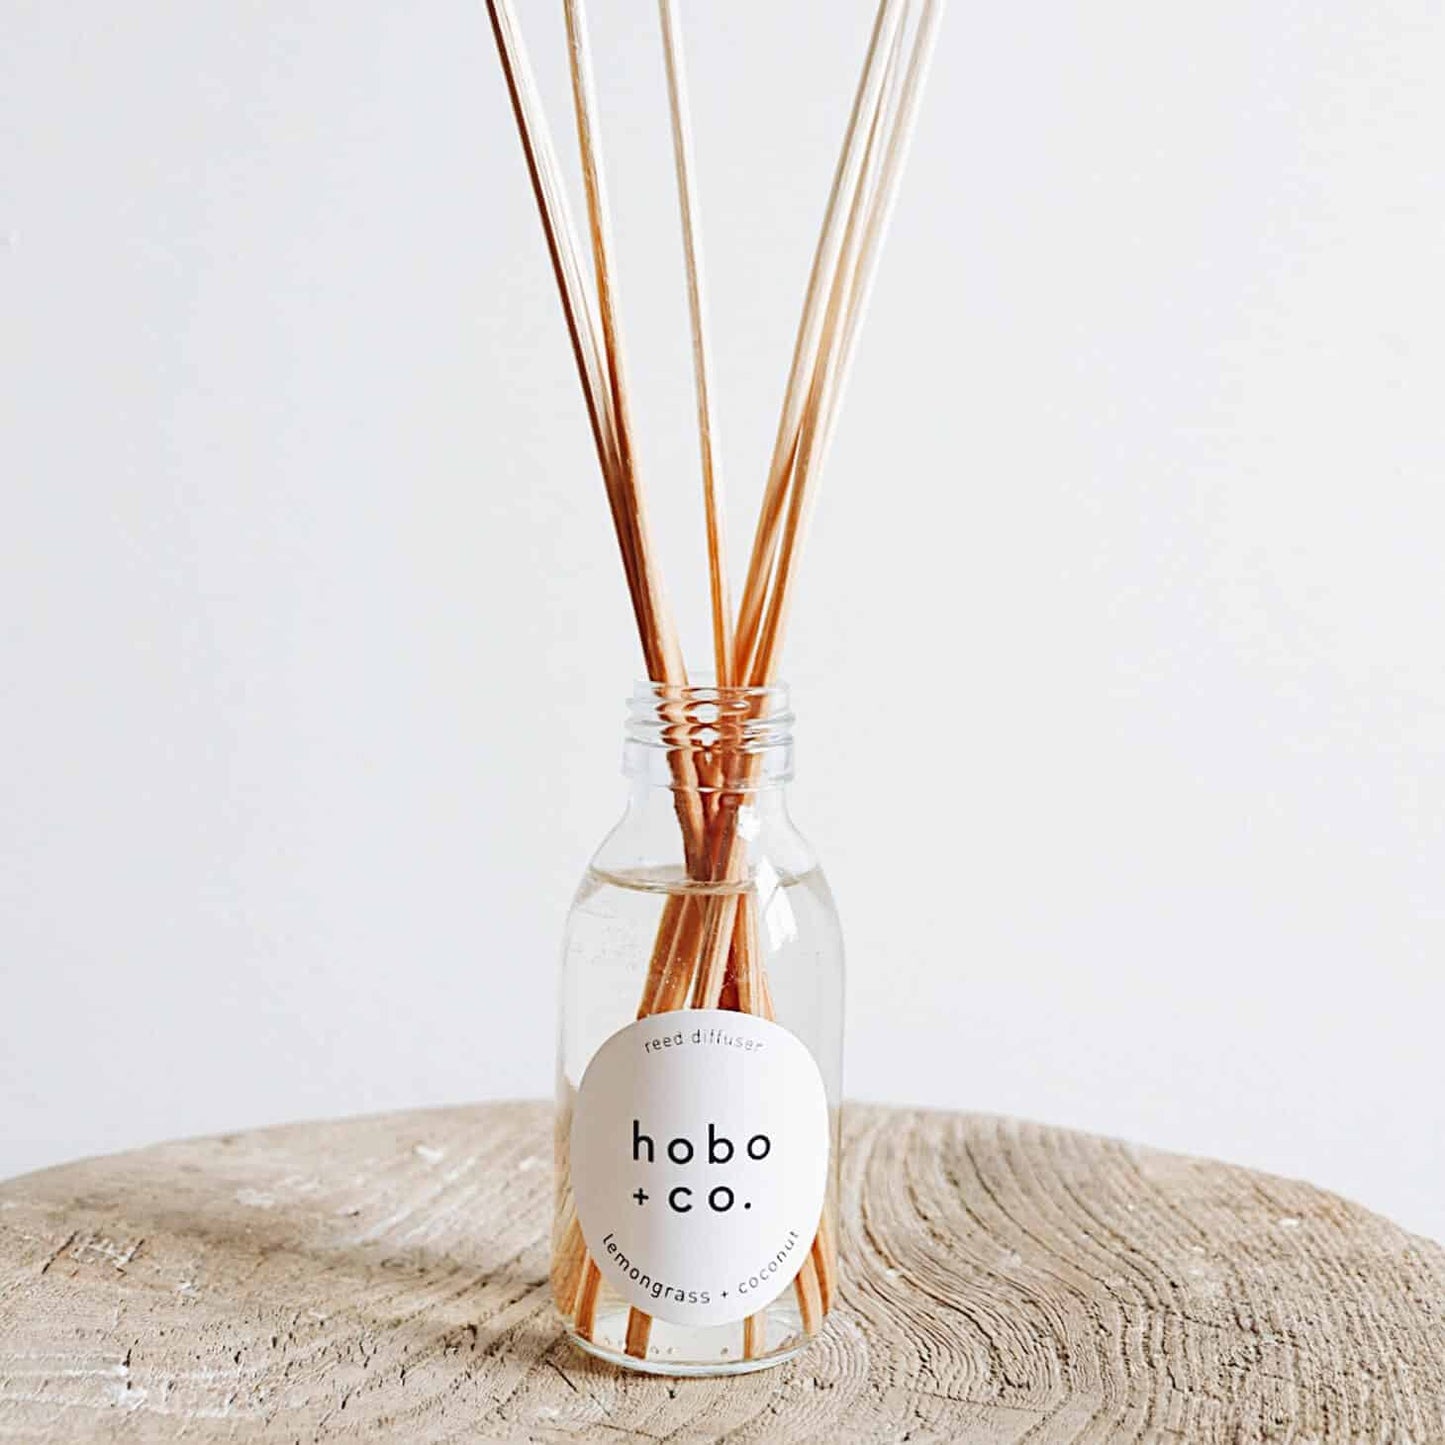 Hobo + Co. Lemongrass & Coconut Reed Diffuser - Osmology Scented Candles & Home Fragrance